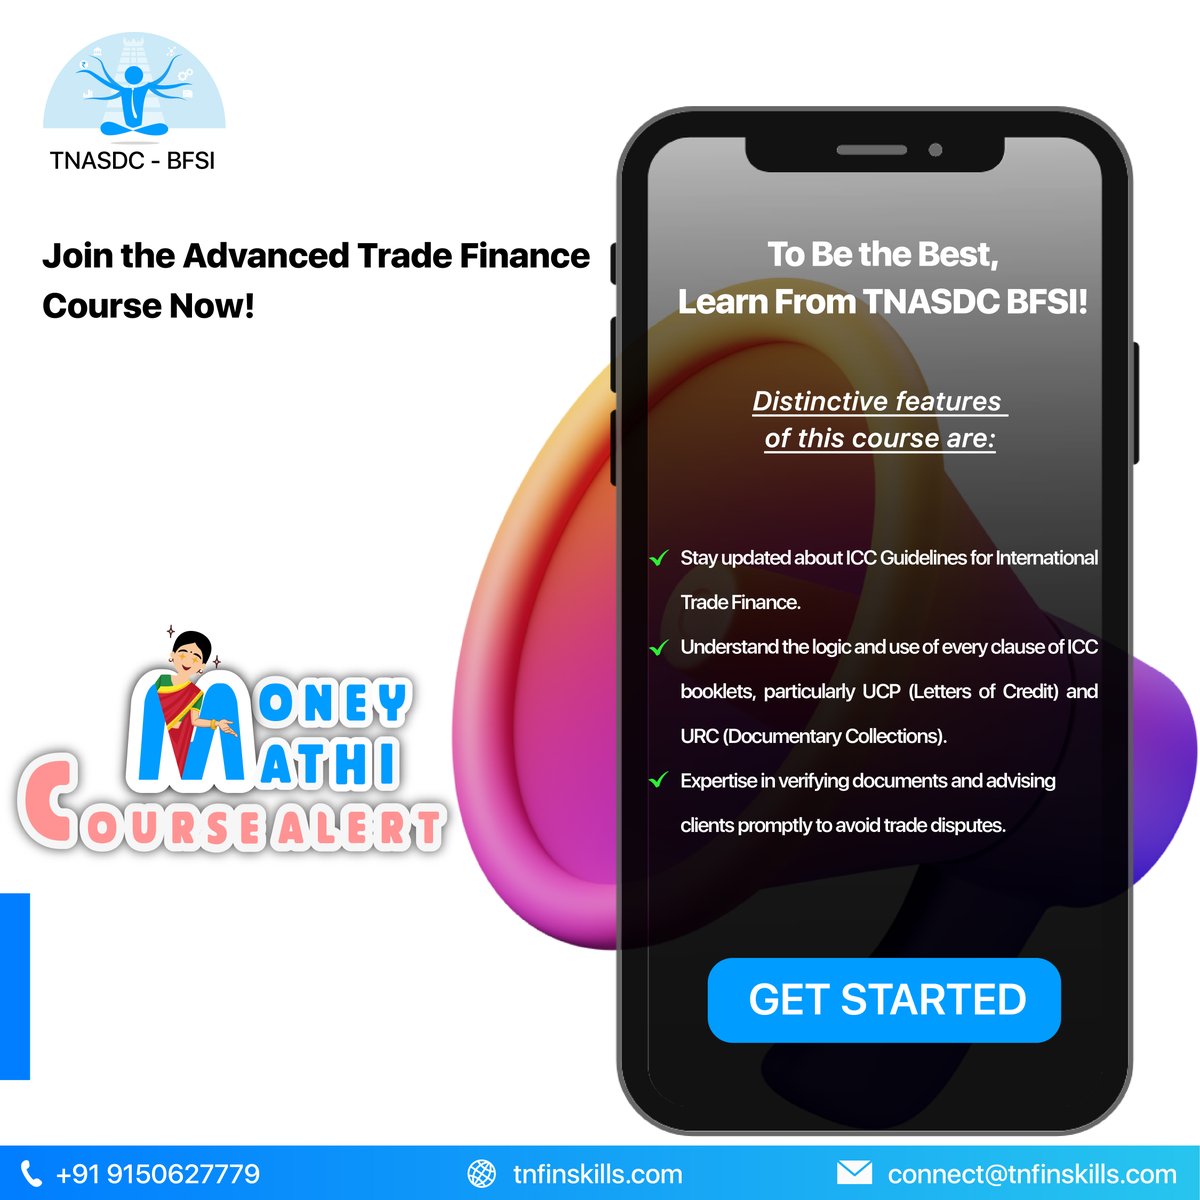 MoneyMathi CourseAlert ⚠️

🔔Join the Advanced Trade Finance Course today with TNASDC BFSI. 

👉Visit  tnfinskills.com to learn more about the course. 

#tnasdcbfsi #tnsdc #naanmudhalvan